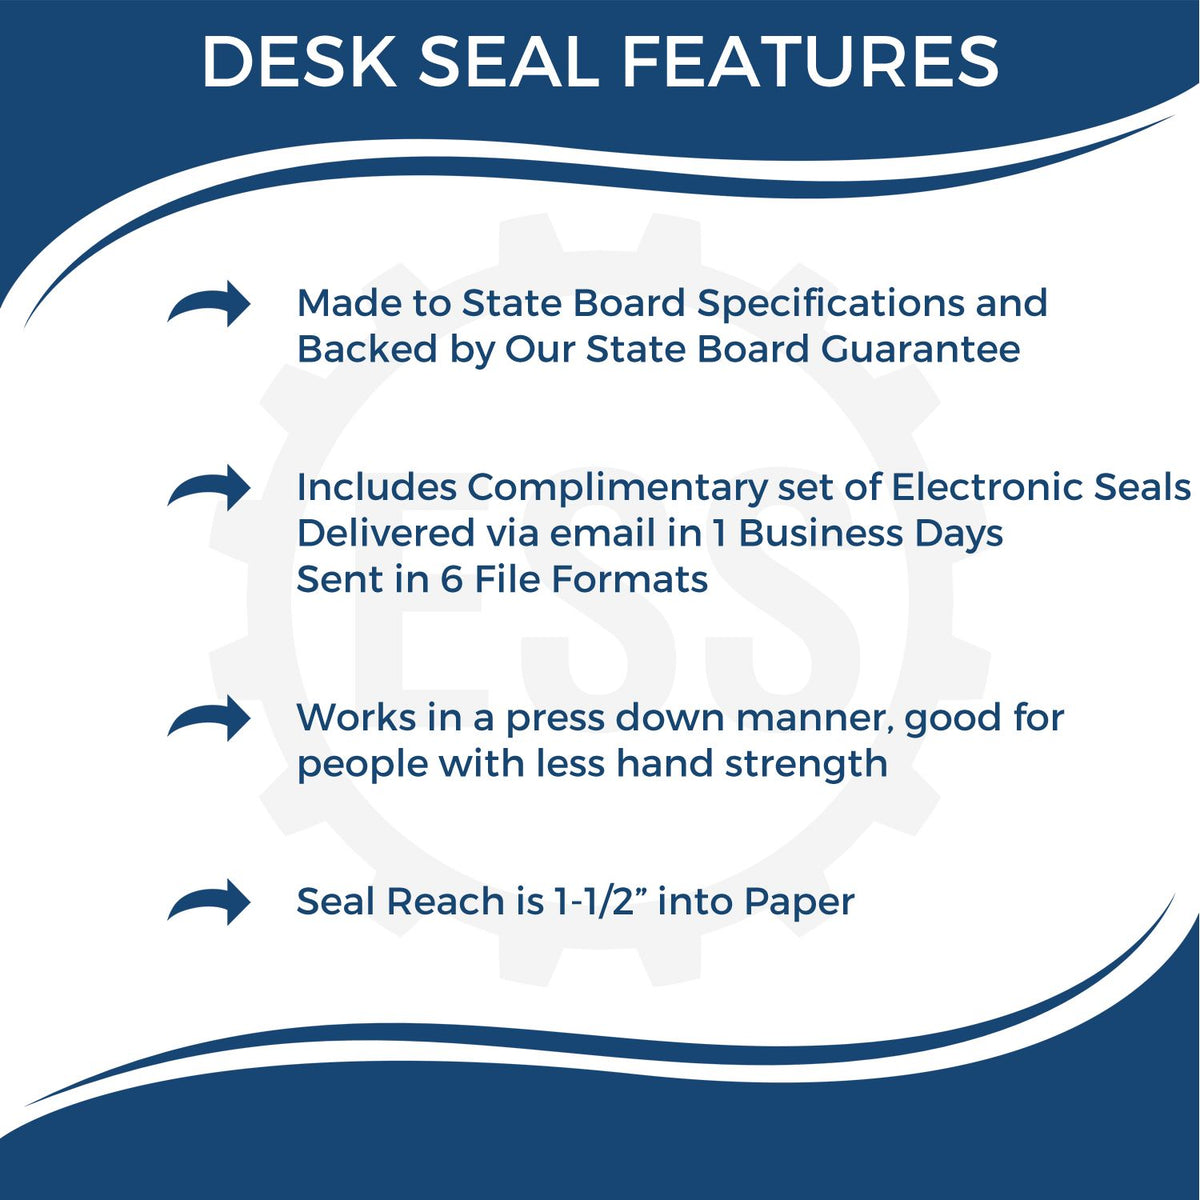 A picture of an infographic highlighting the selling points for the Alaska Geologist Desk Seal